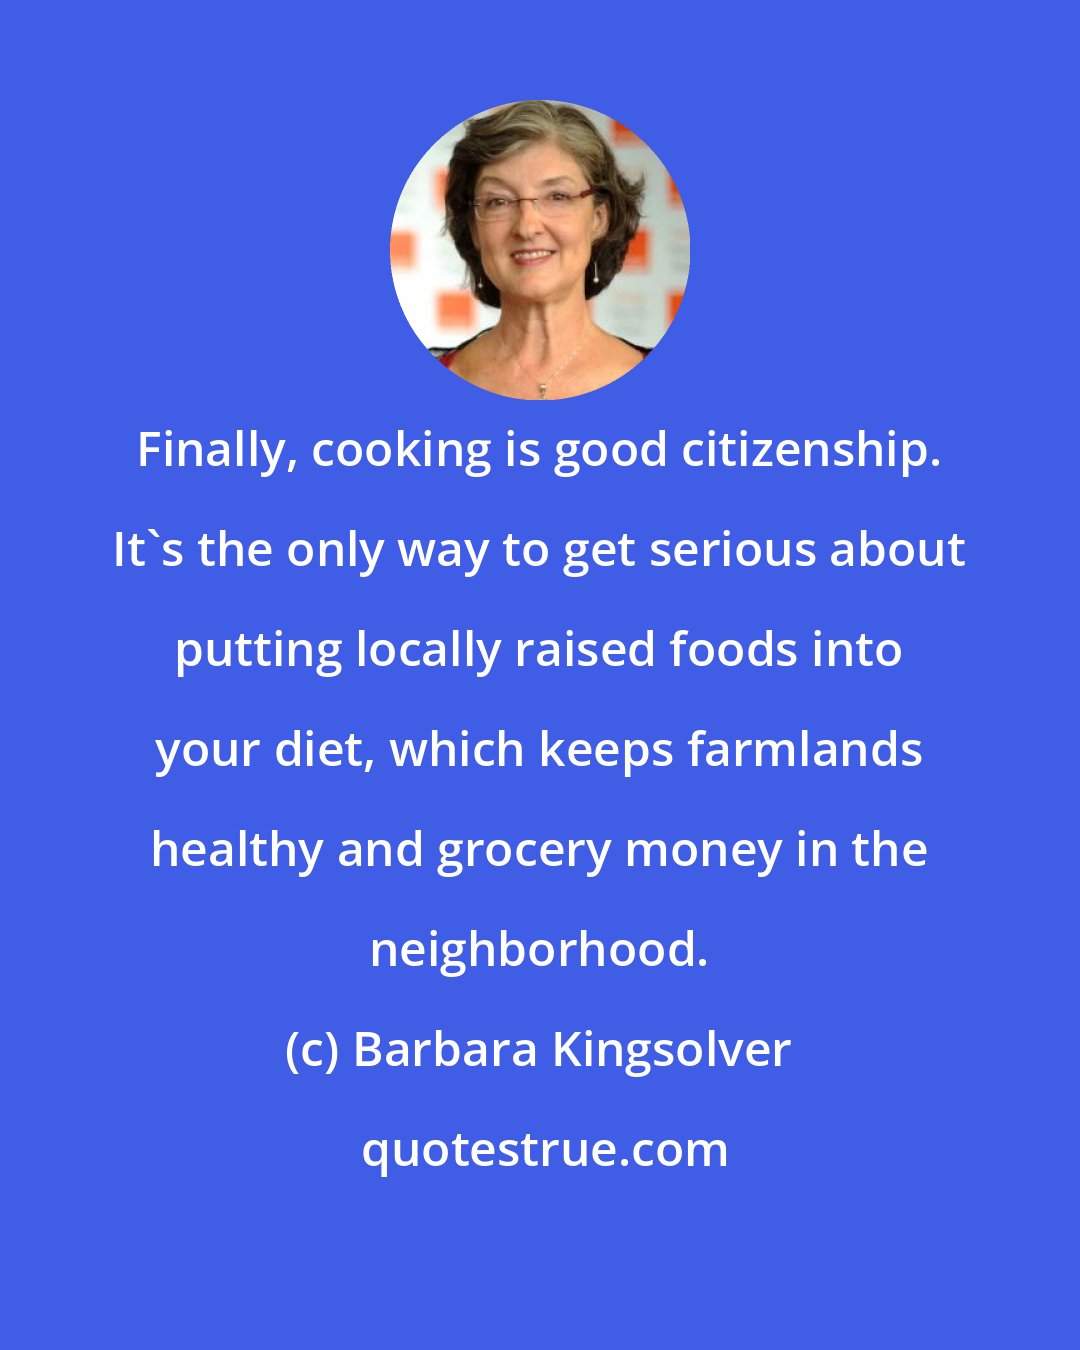 Barbara Kingsolver: Finally, cooking is good citizenship. It's the only way to get serious about putting locally raised foods into your diet, which keeps farmlands healthy and grocery money in the neighborhood.